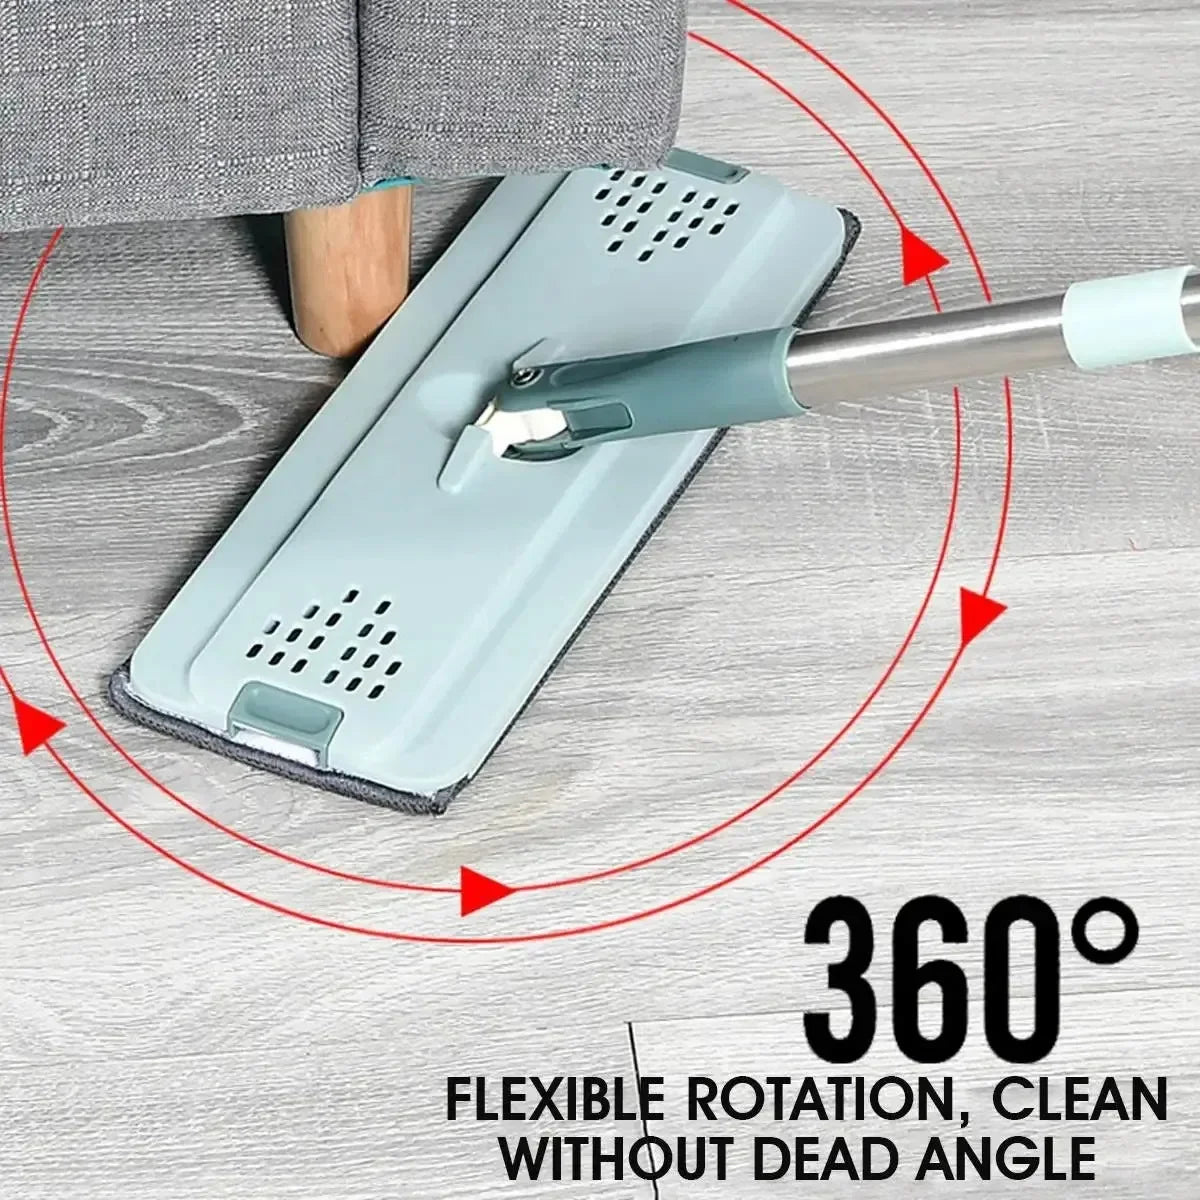 Mop with Bucket Hand Free, Wet or Dry Usage on Hardwood Laminate